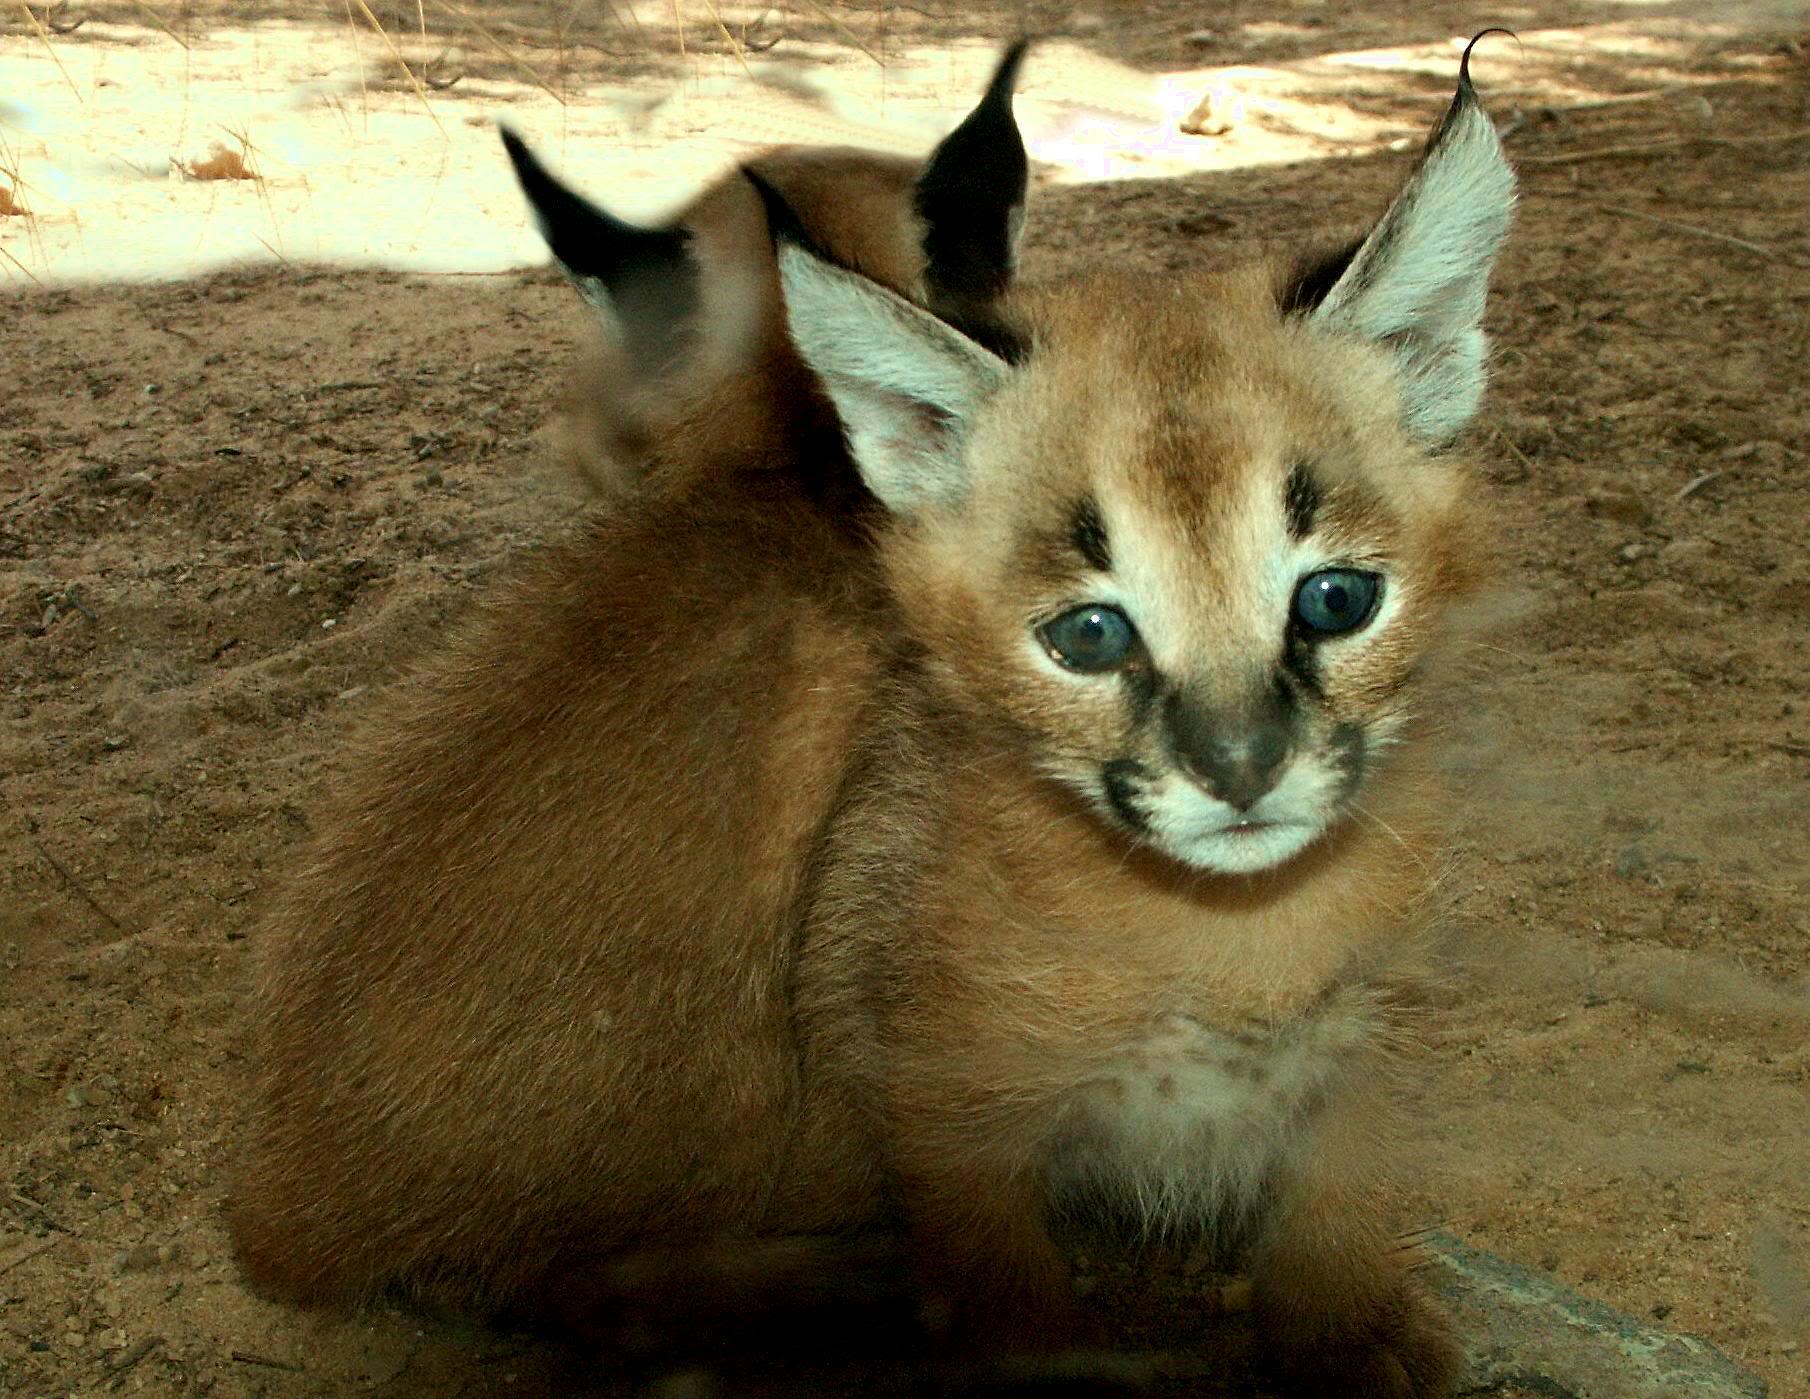 Two Caracal kits in the desert